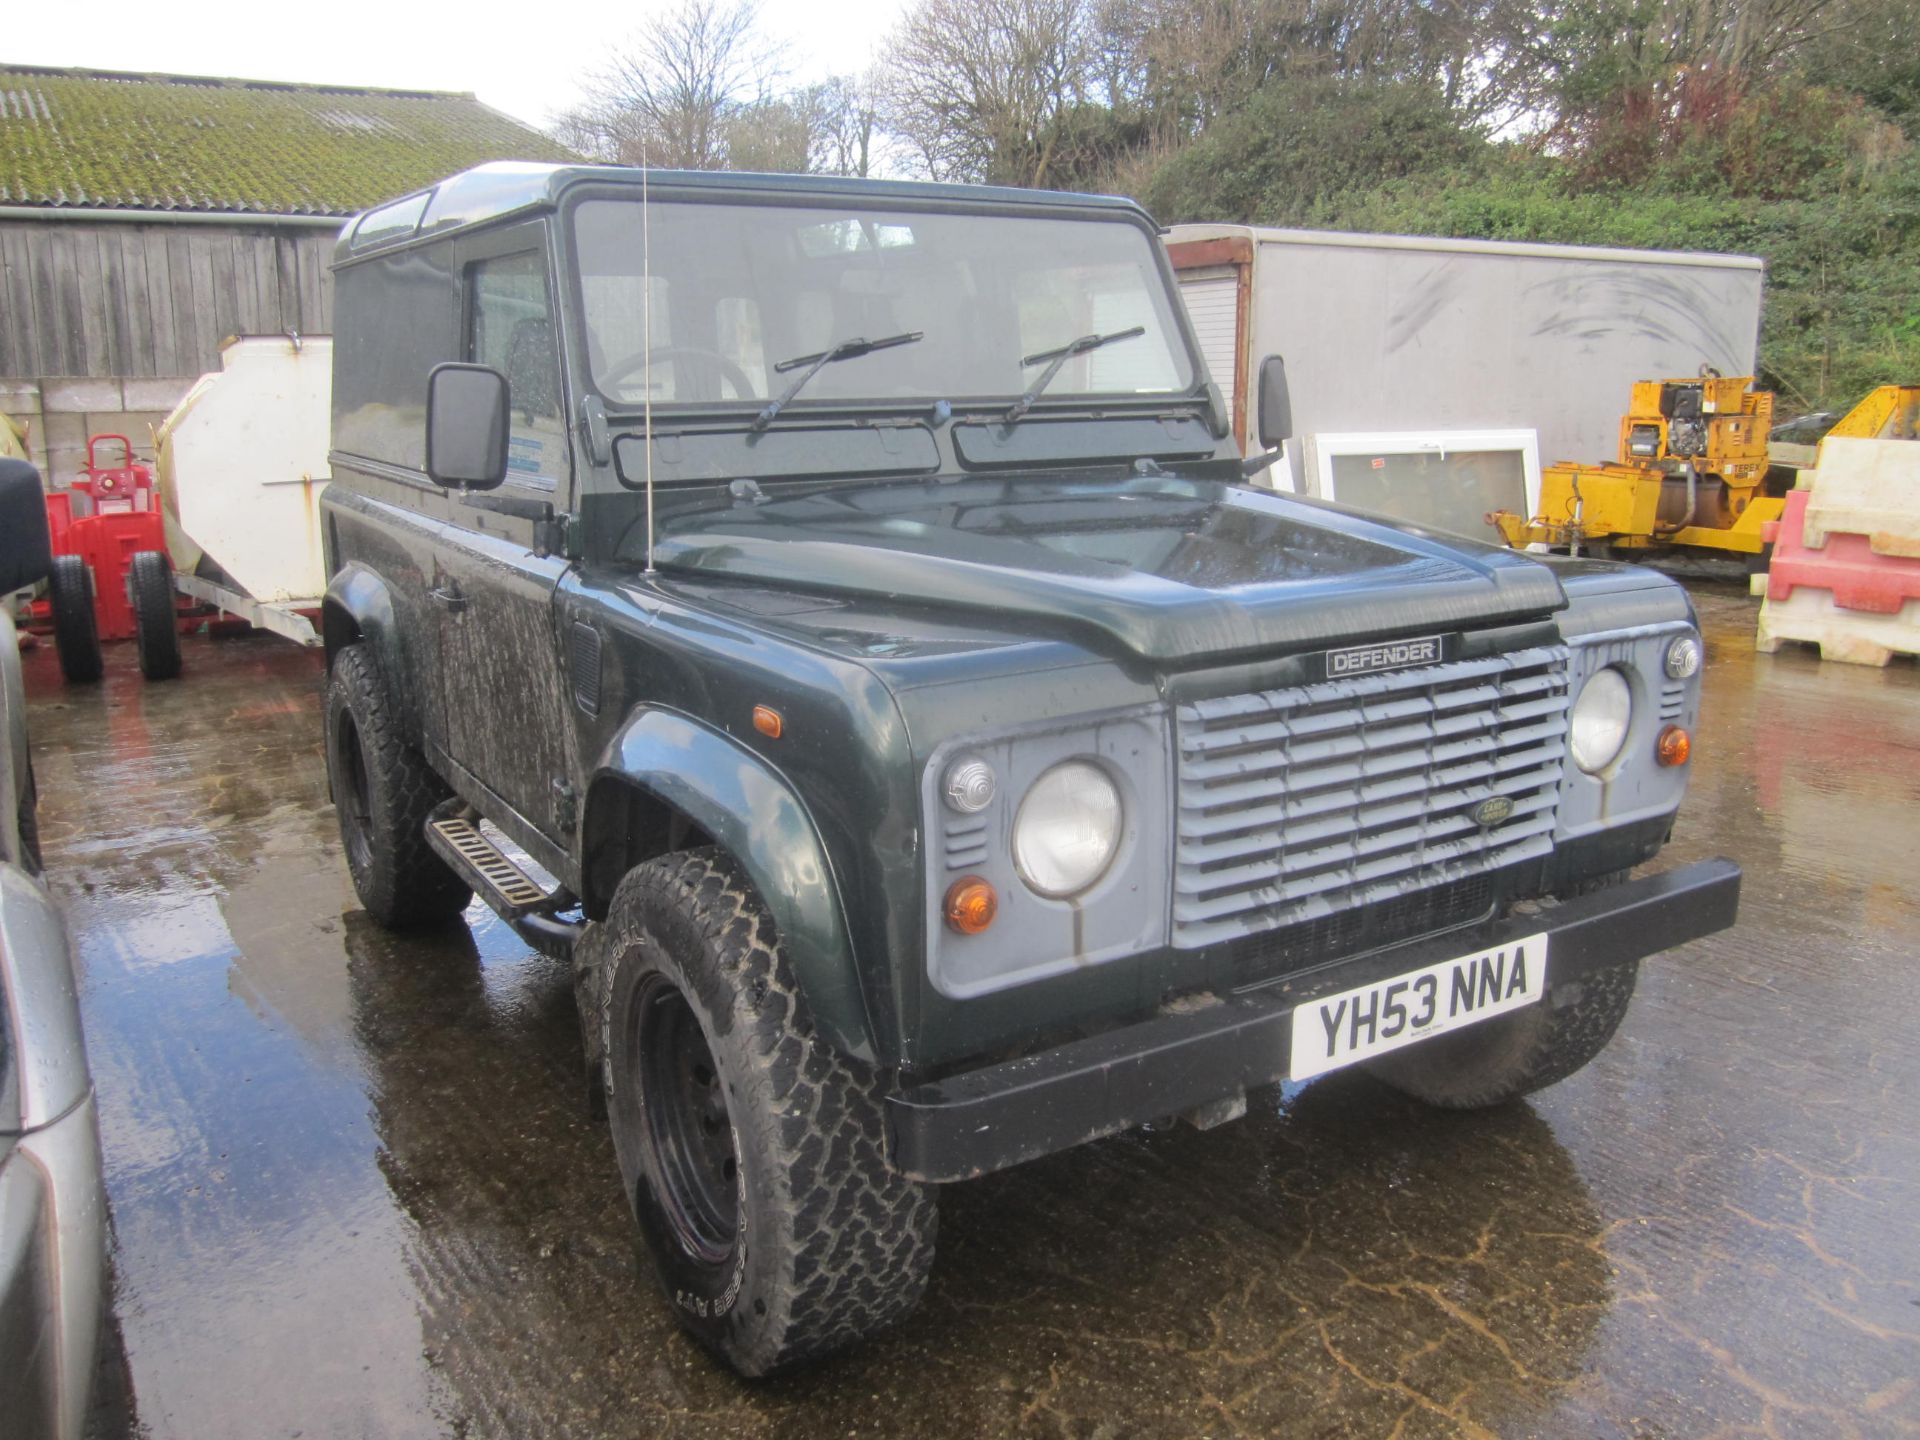 Landrover Defender 90 County TD5 2.5 4WD station wagon, reg no. YH53 NNA (2003), recorded mileage